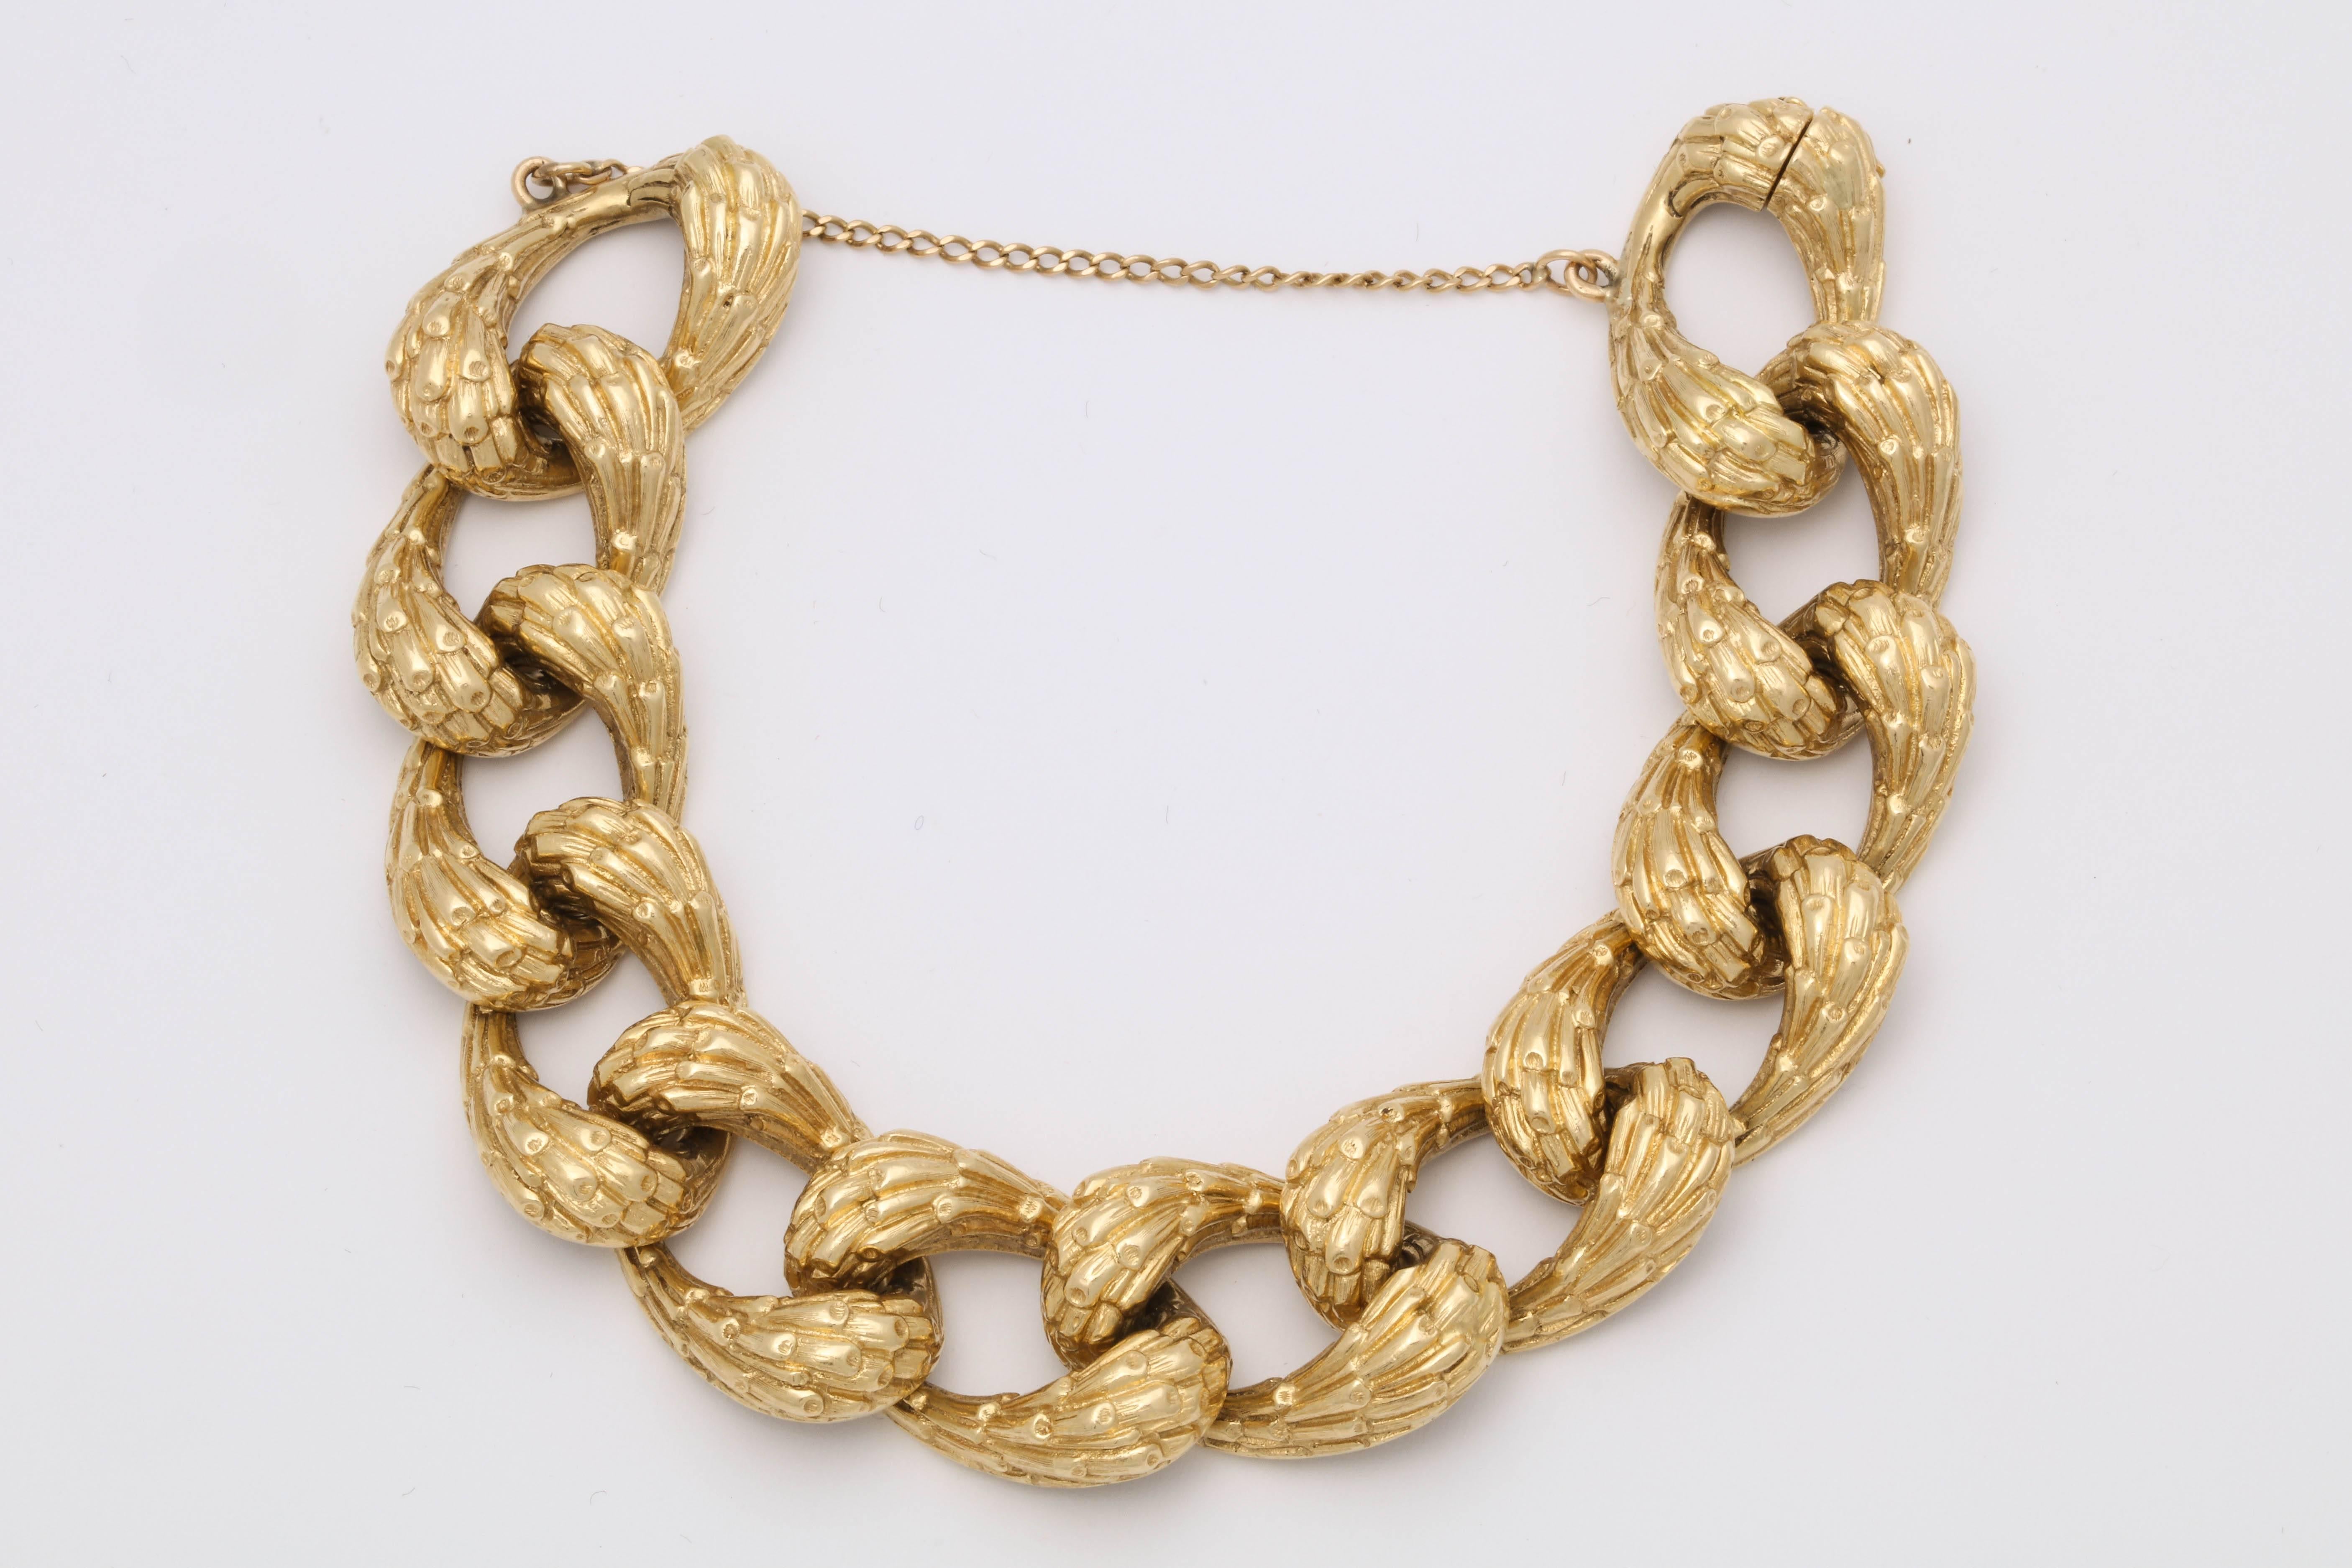 Women's or Men's 1970s Chic and High Quality Open Link Textured Gold Flexible Heavy Bracelet